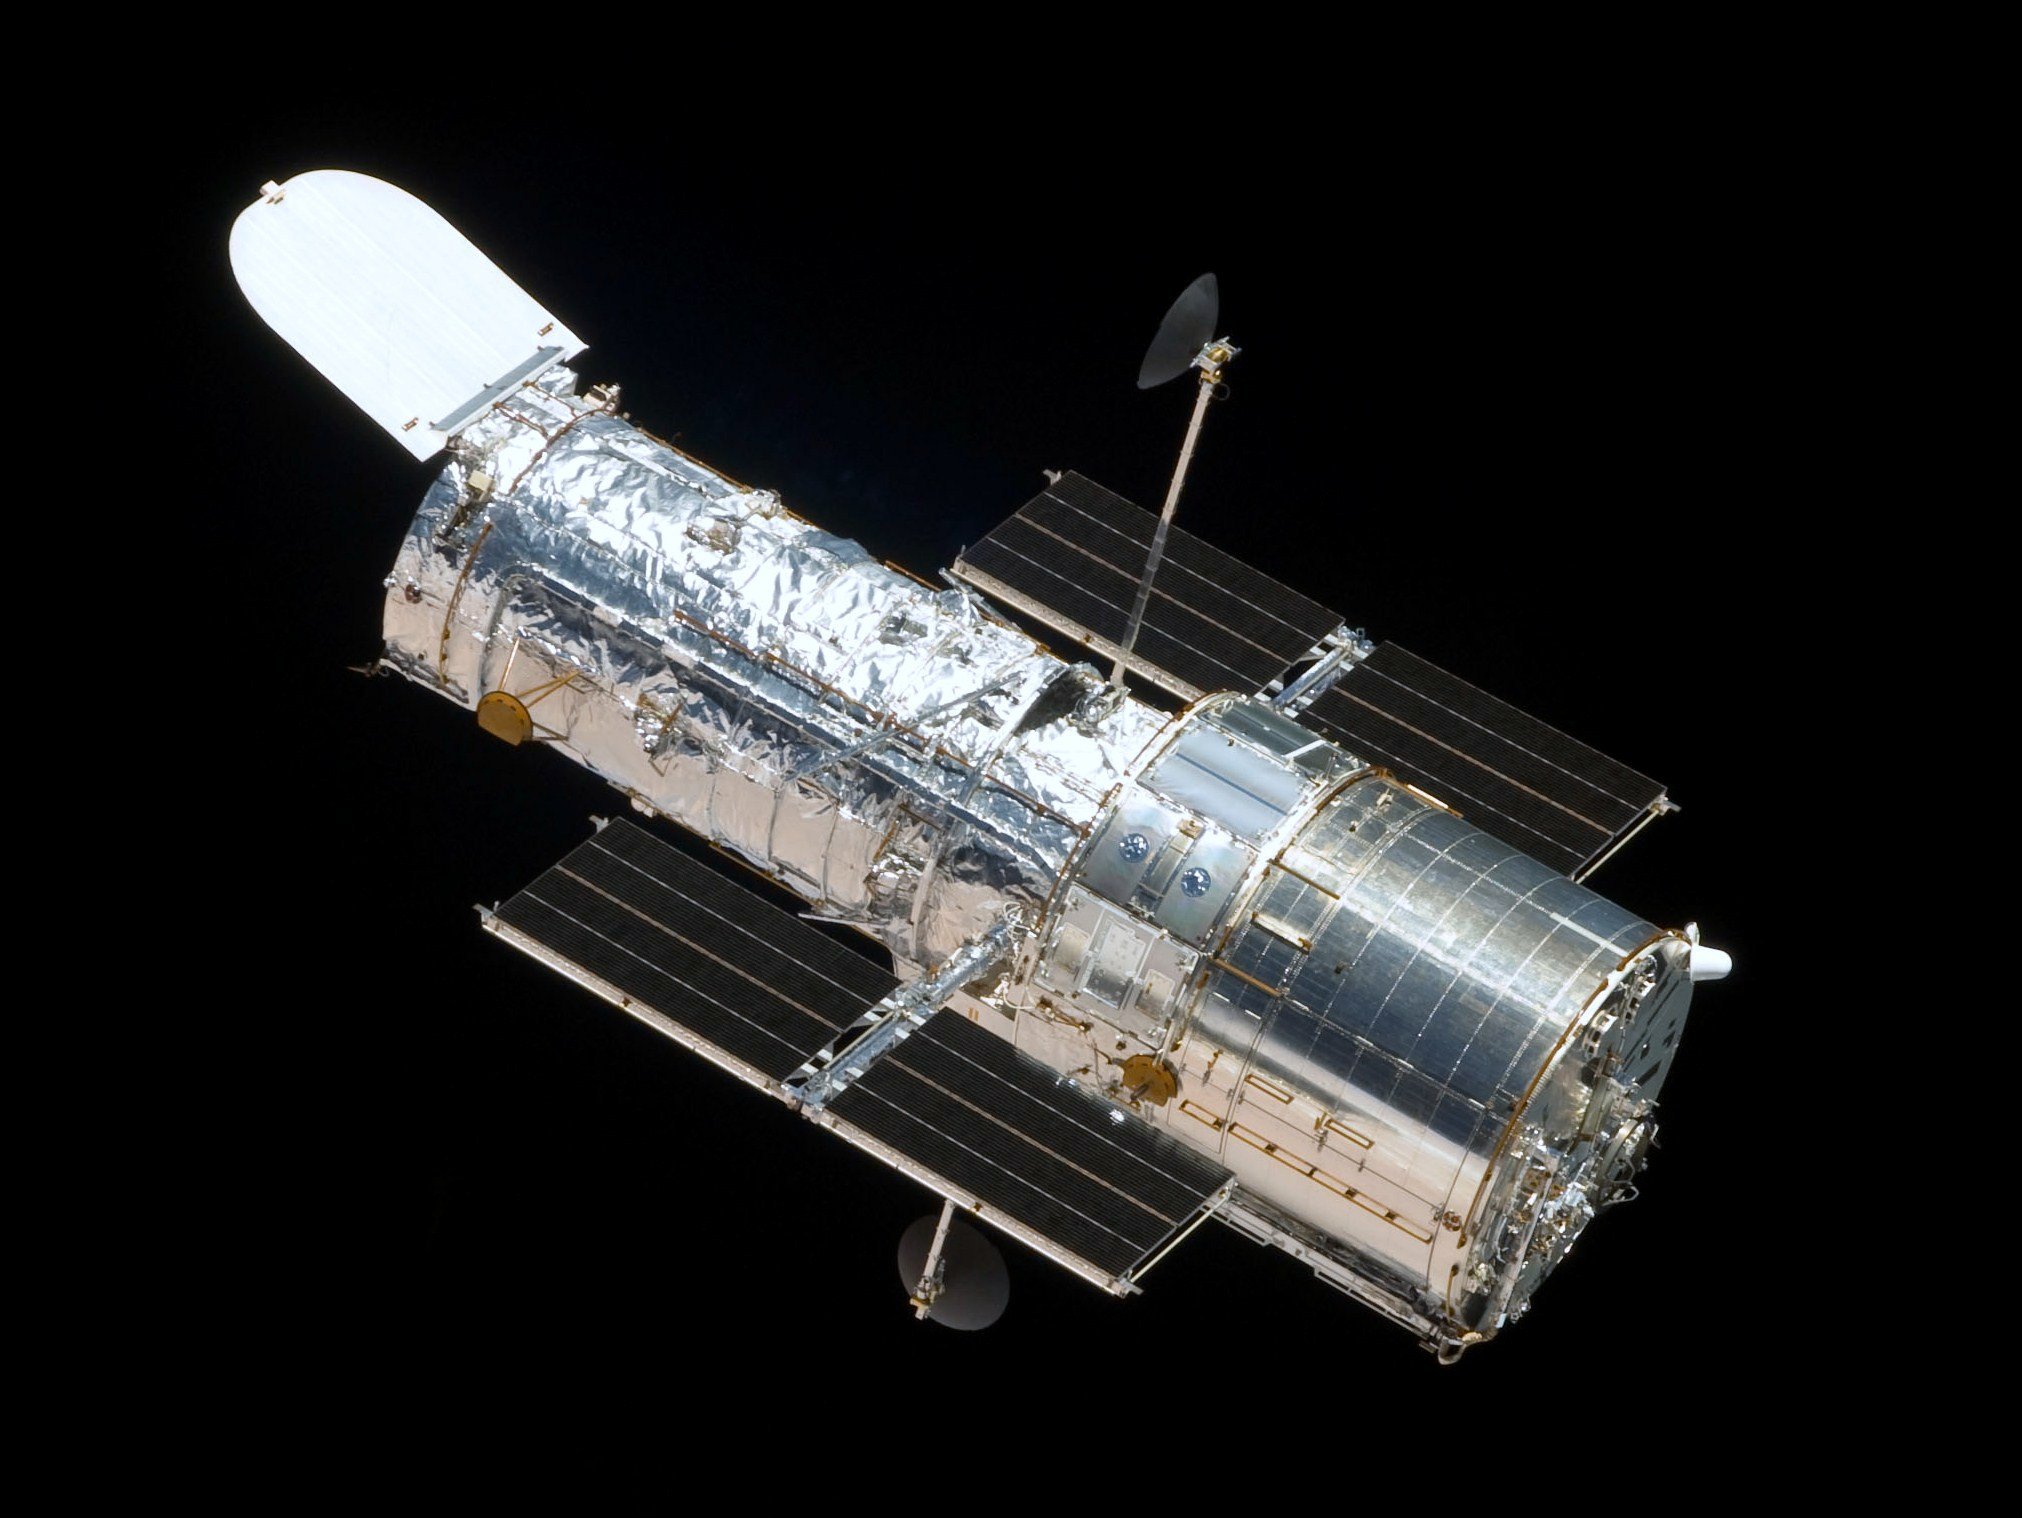 April 24 1990 - The Hubble Space Telescope is Launched